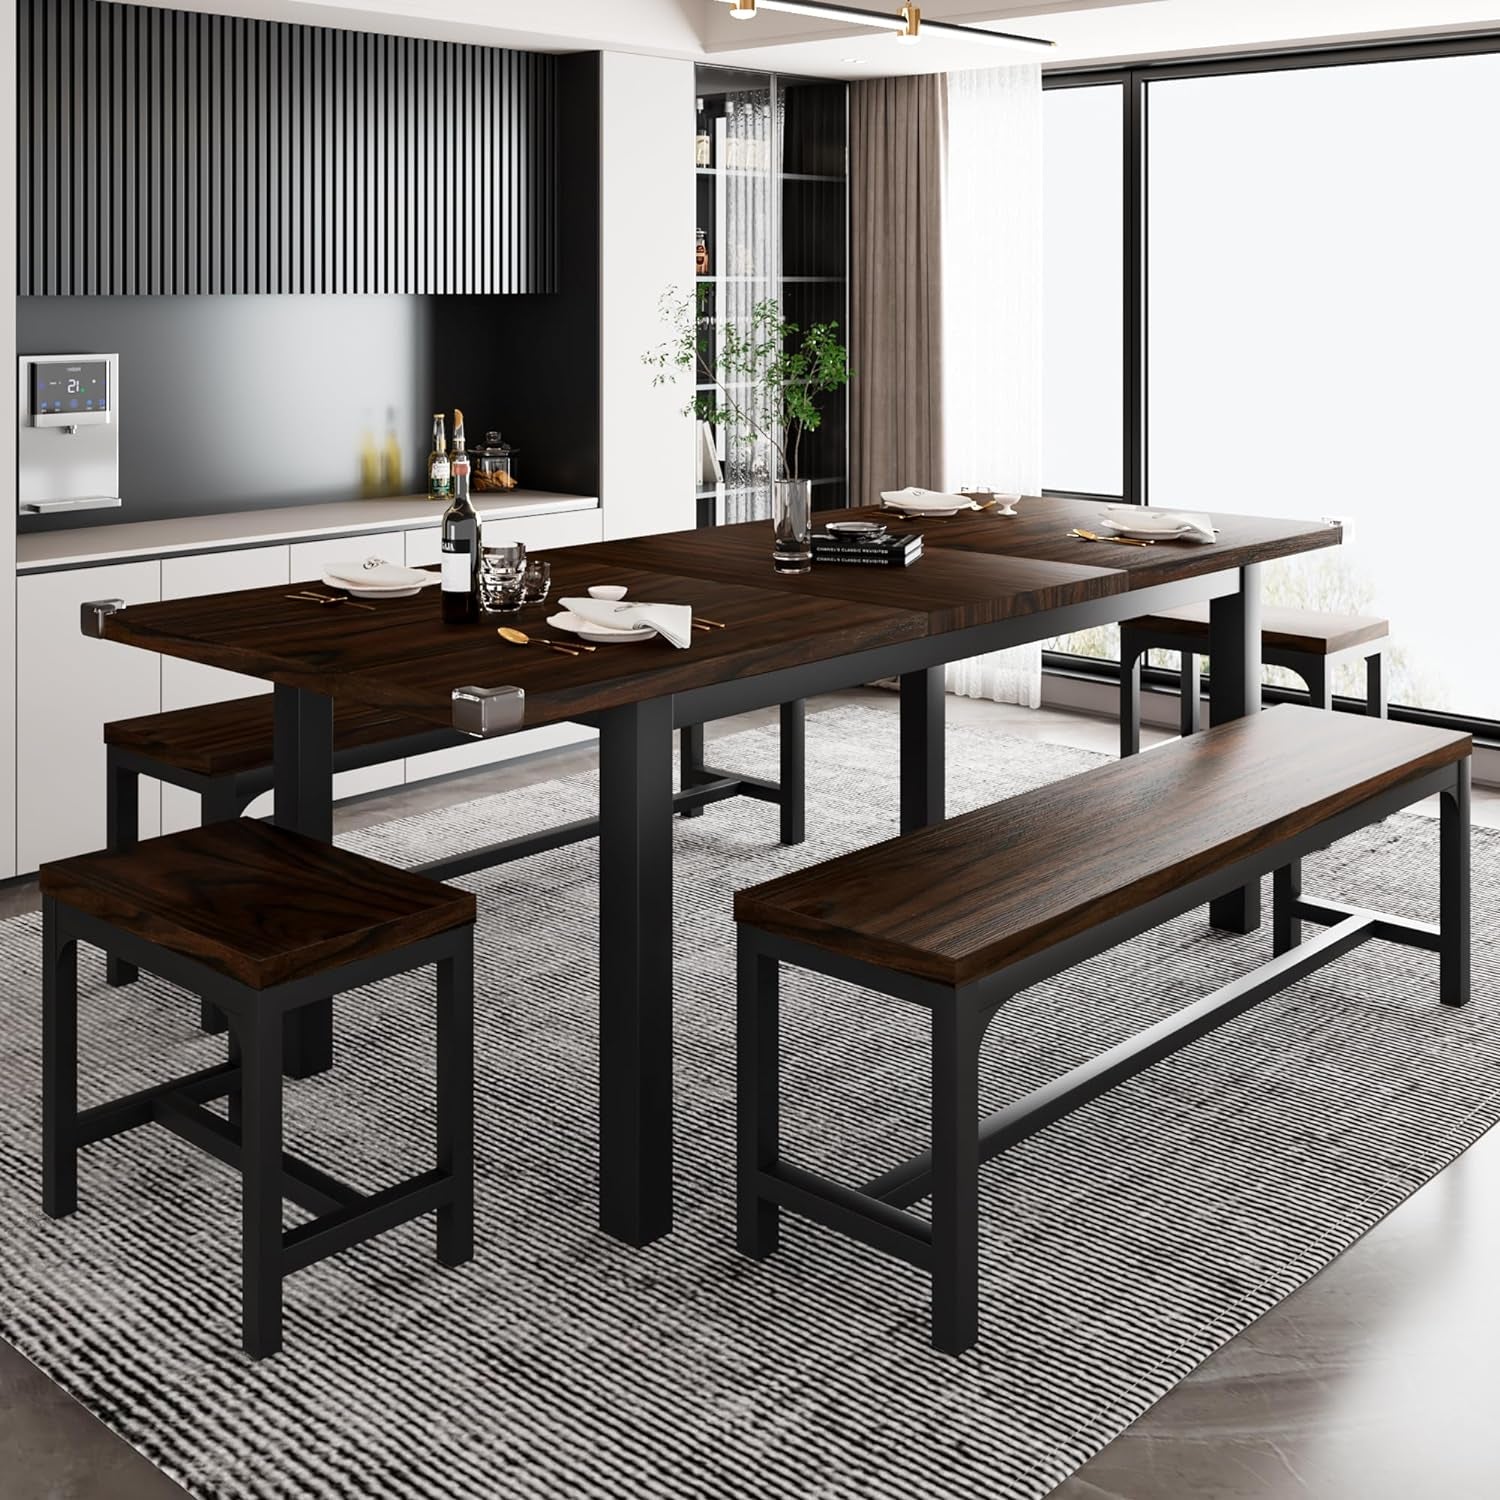 5-Piece Dining Table Set for 4-8 People, Extendable Kitchen Table Set with 2 Benches and 2 Square Stools, Mid-Century Dining Room Table with Metal Frame & MDF Board, Saving Space, Espresso